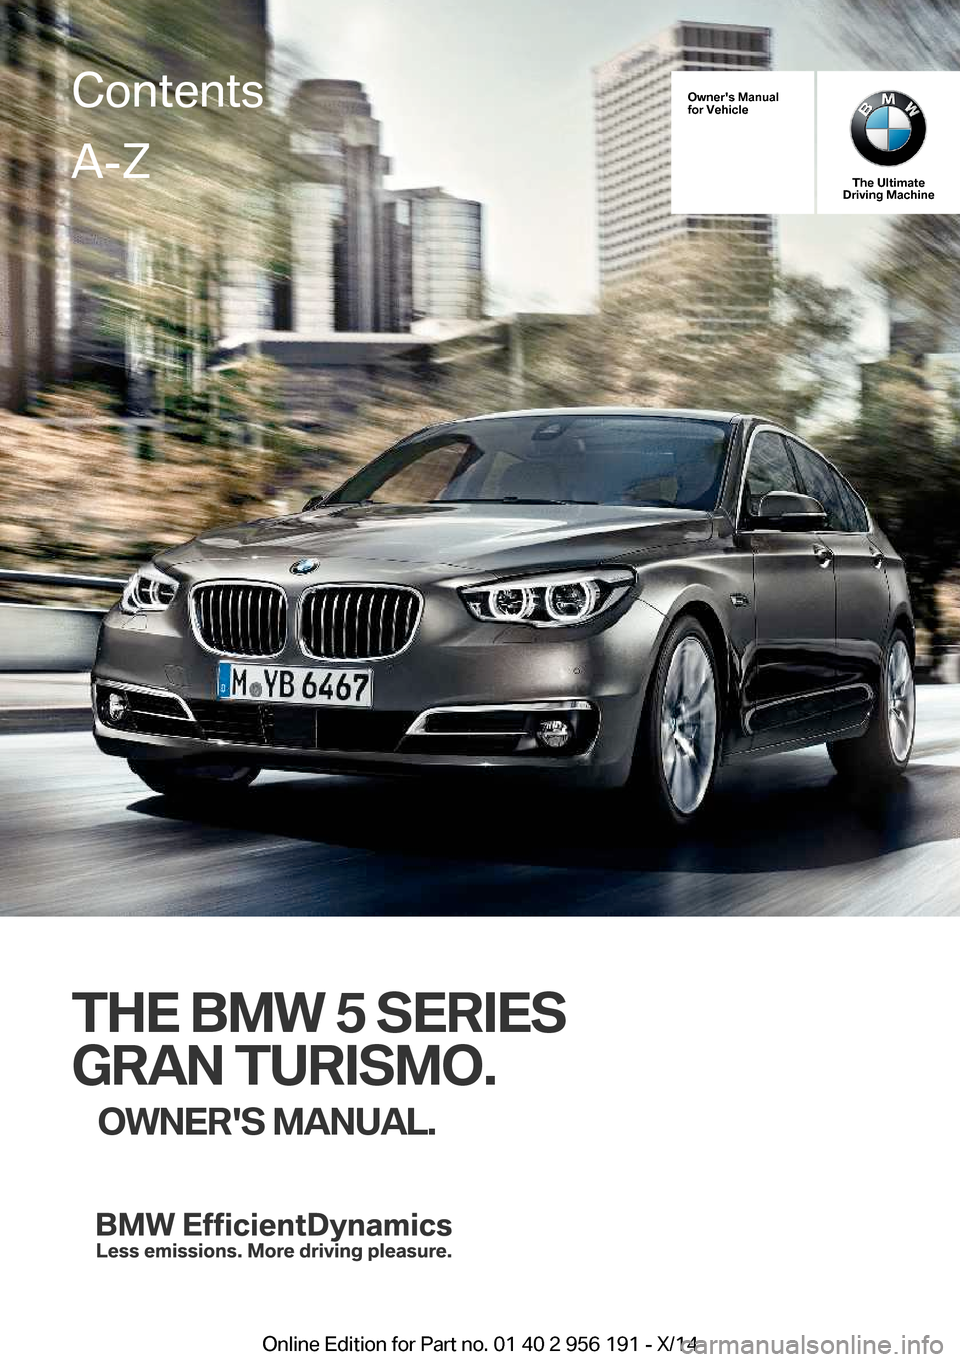 BMW 5 SERIES GRAN TURISMO 2014 F07 Owners Manual Owners Manual
for Vehicle
The Ultimate
Driving Machine
THE BMW 5 SERIES
GRAN TURISMO. OWNERS MANUAL.
ContentsA-Z
Online Edition for Part no. 01 40 2 956 191 - X/14   